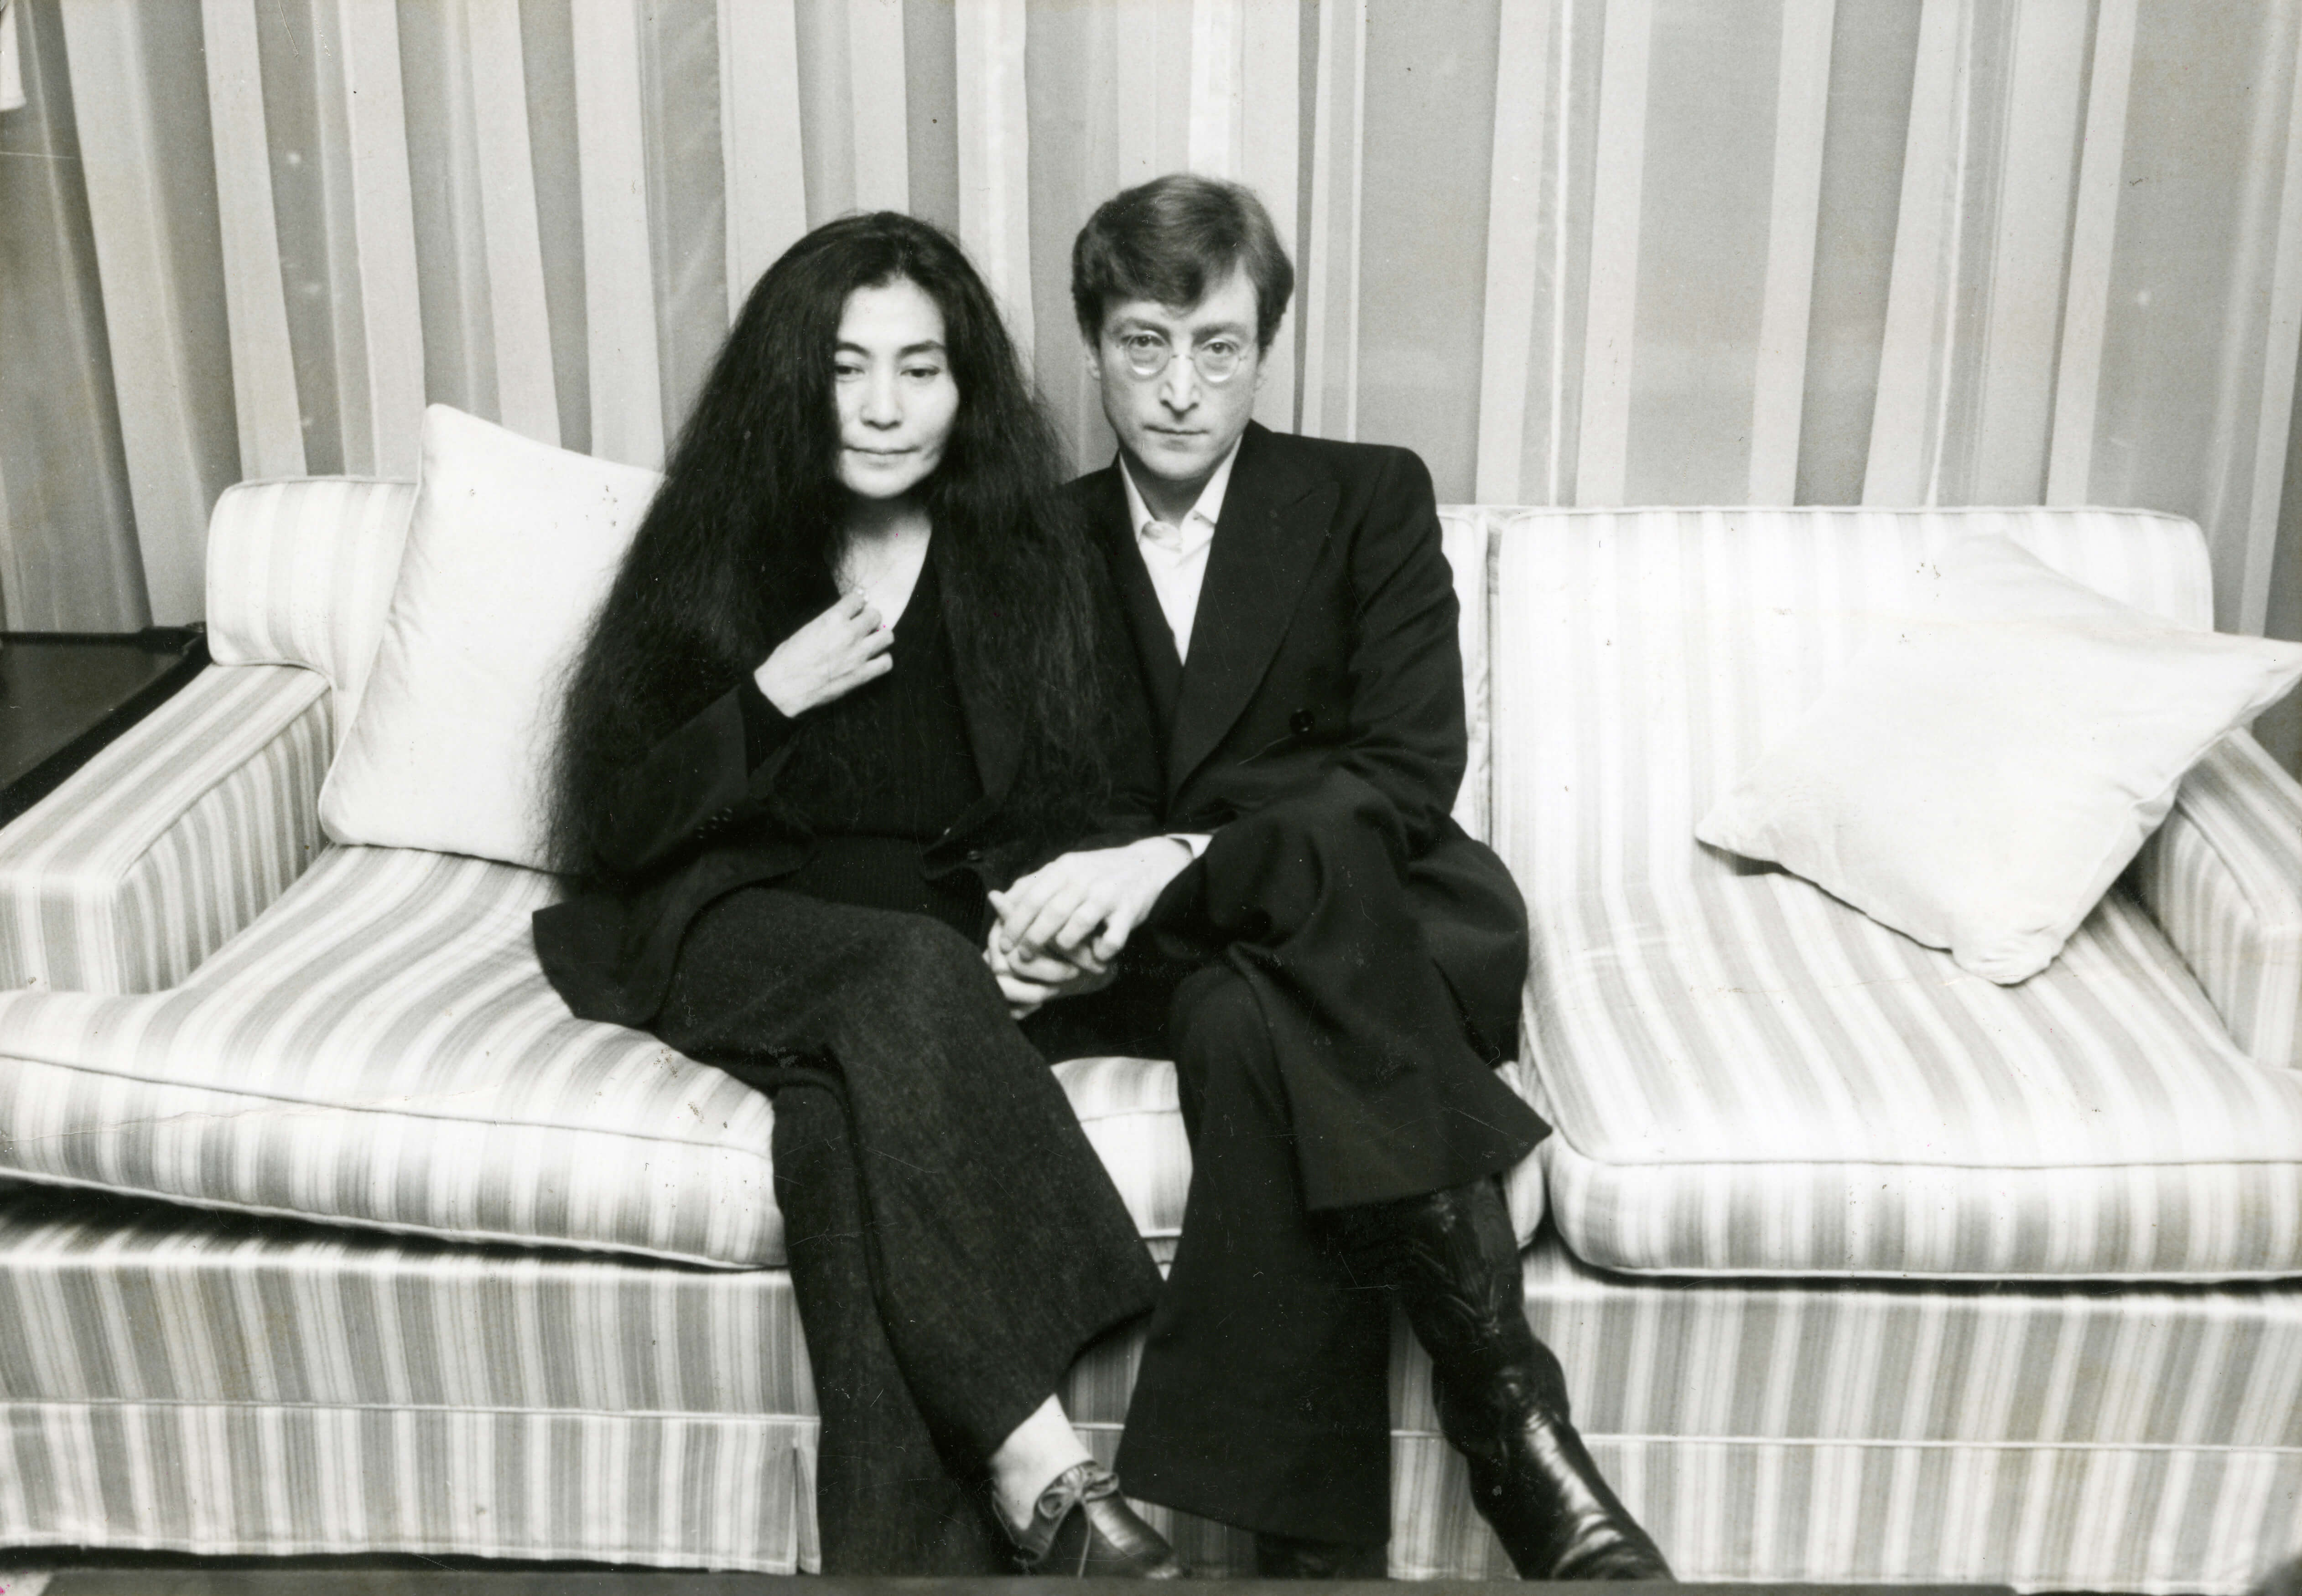 Yoko Ono and John Lennon sit on a couch.